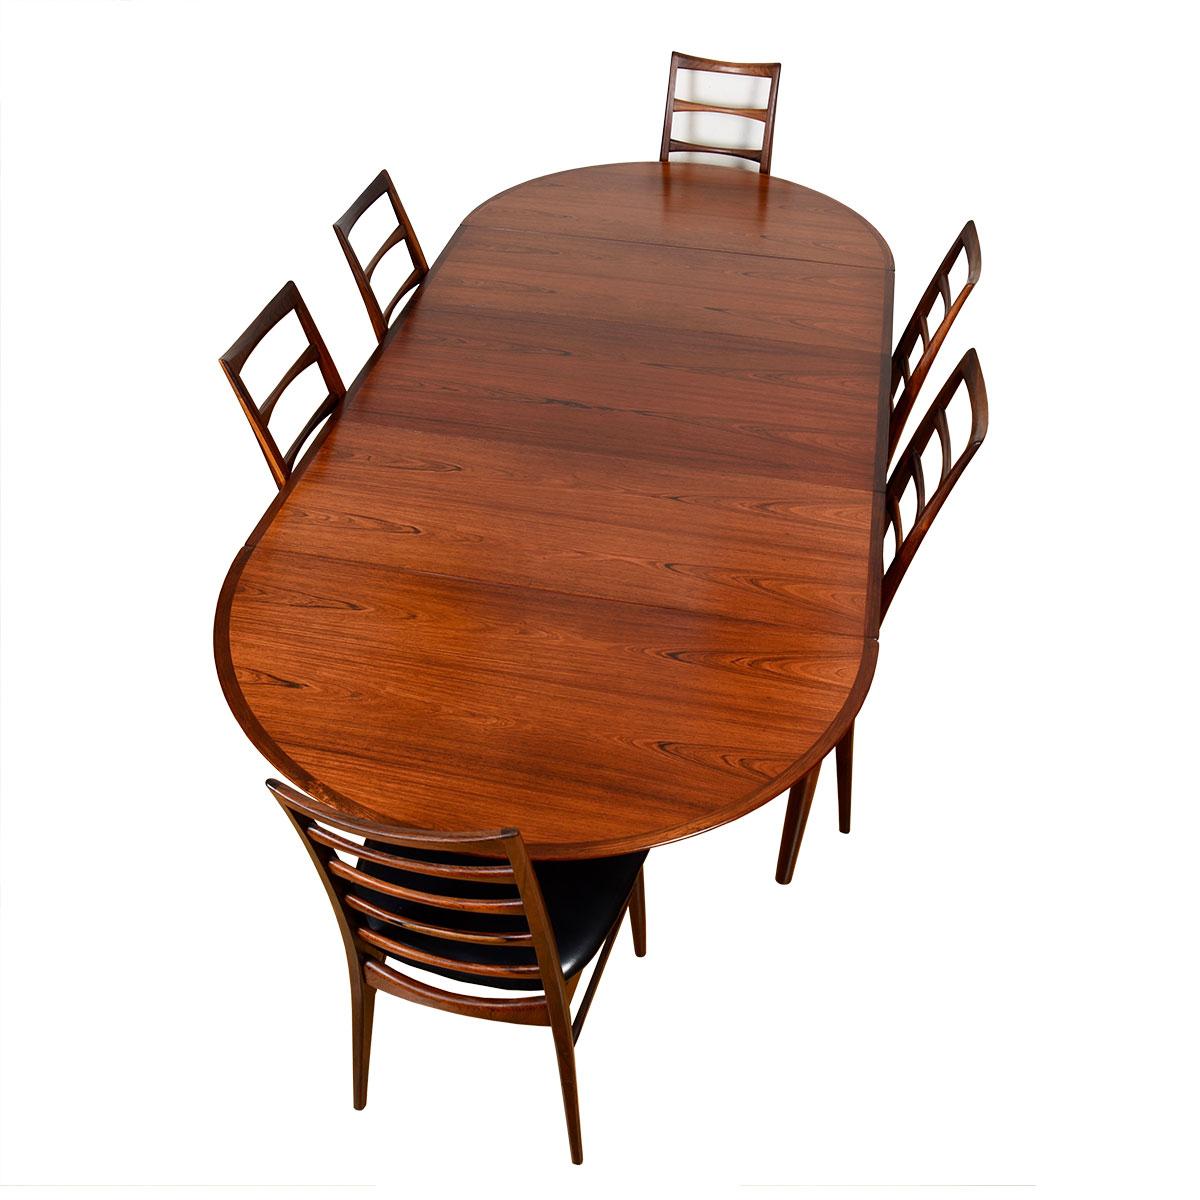 Vodder Danish Rosewood Dining Table with Removable Drop Leaves + Middle Leaf For Sale 2